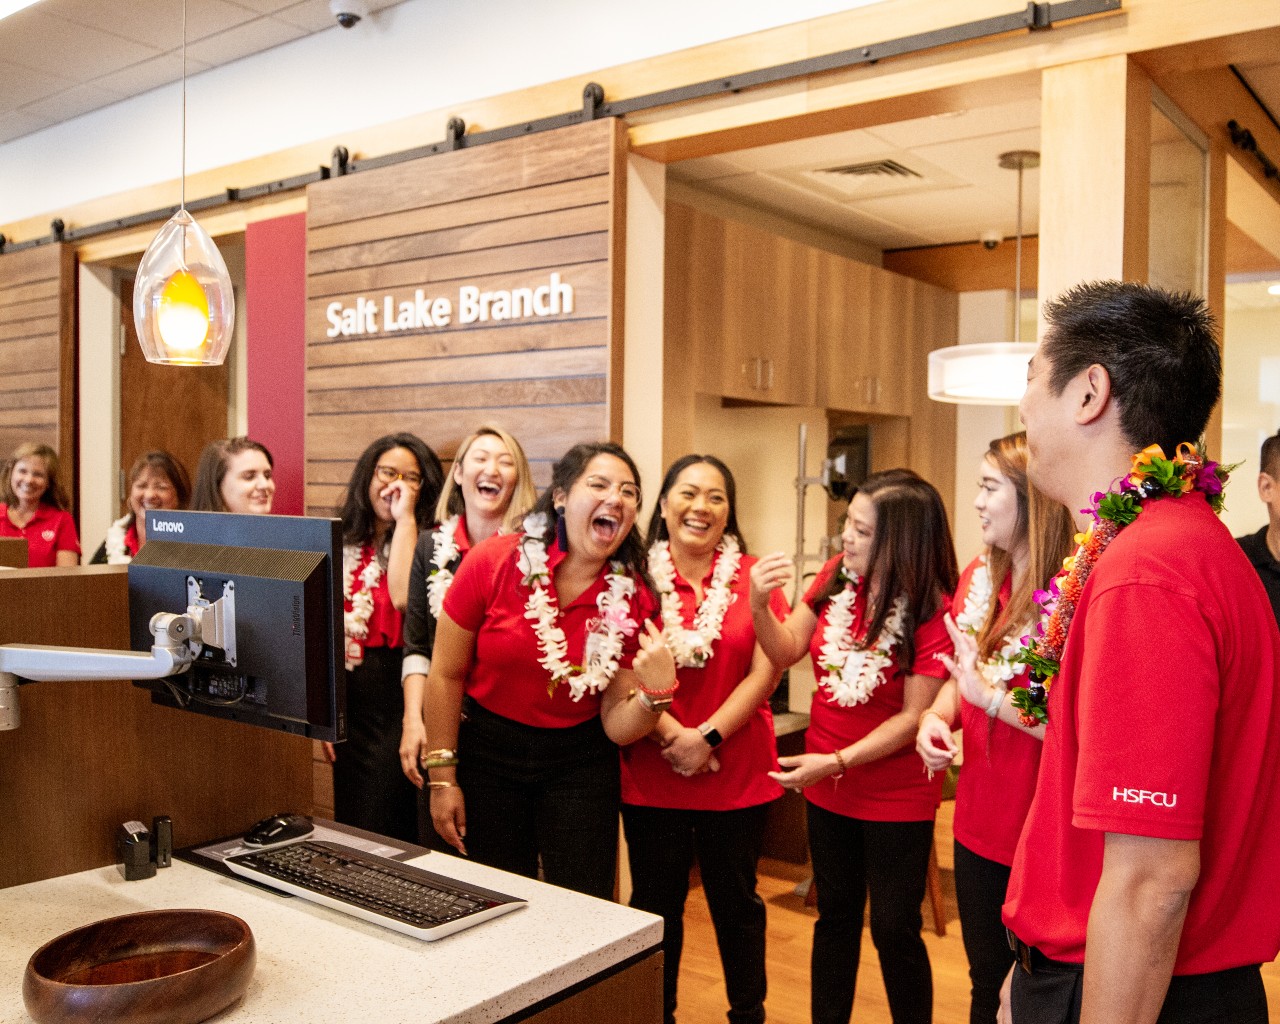 A group of credit union employees wearing red shirts and white floral leis laugh together, surrounded by a wood panel wall, a pendant light, and a computer workstation.